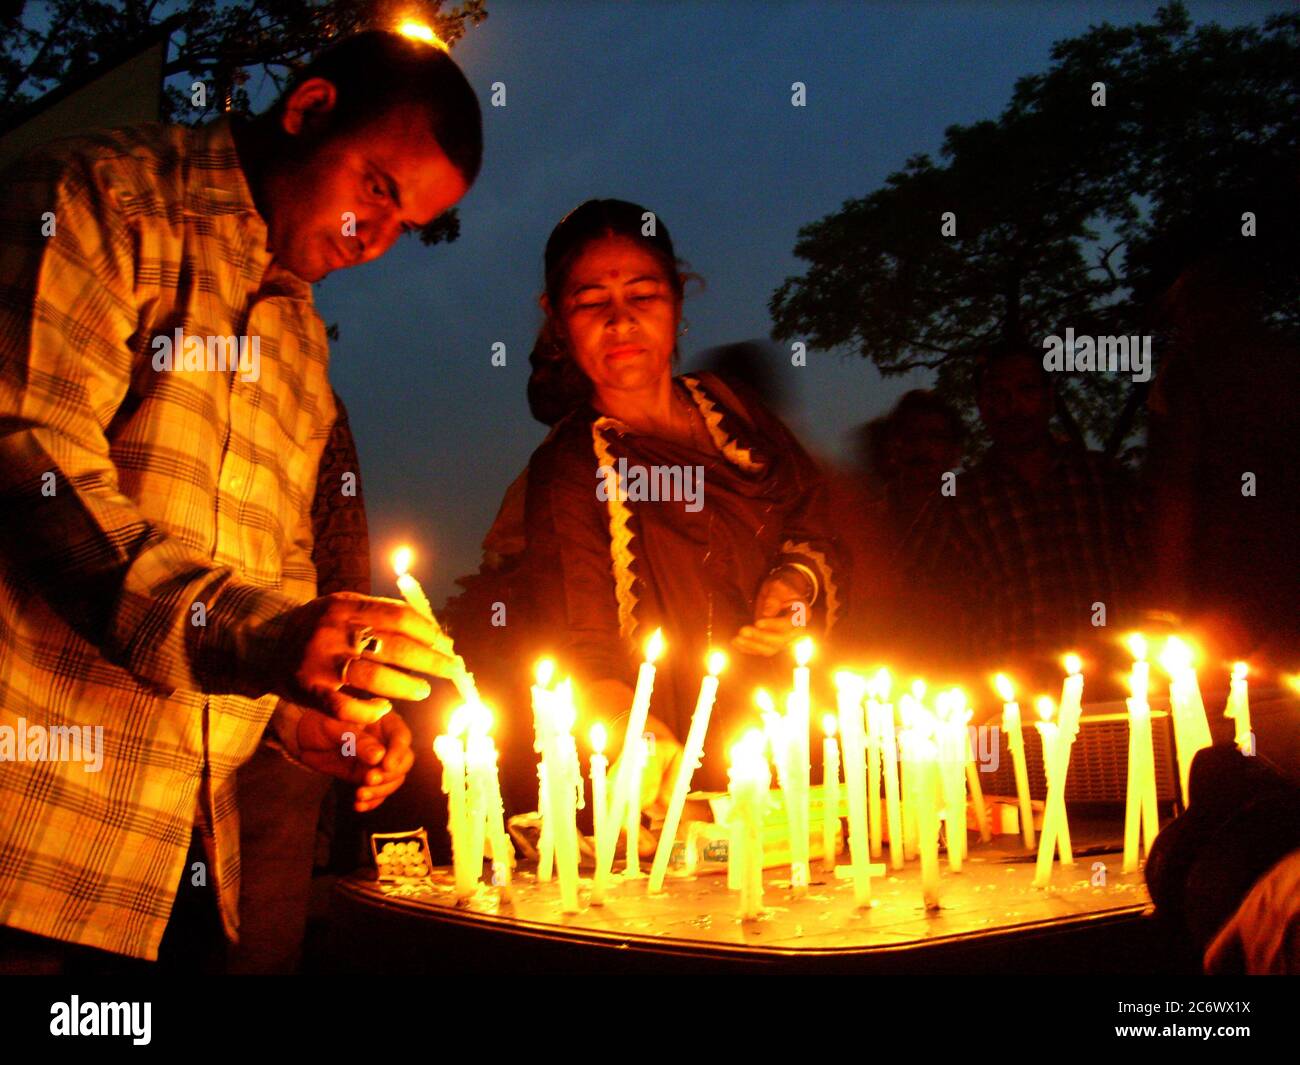 A rally with candles, against the brutality in Nandigram, at a street, in Kolkata, India. November 14, 2007. In 2007 the West Bengal government decided to allow ‘Salim Group’, an Indonesian conglomerate, to set up a chemical hub at Nandigram under the ‘Special Economic Zone’, SEZ, policy. This led to resistance by the villagers resulting in clashes with the police that left 14 dead and accusation of police brutality. Source: www.wikipedia.com Stock Photo